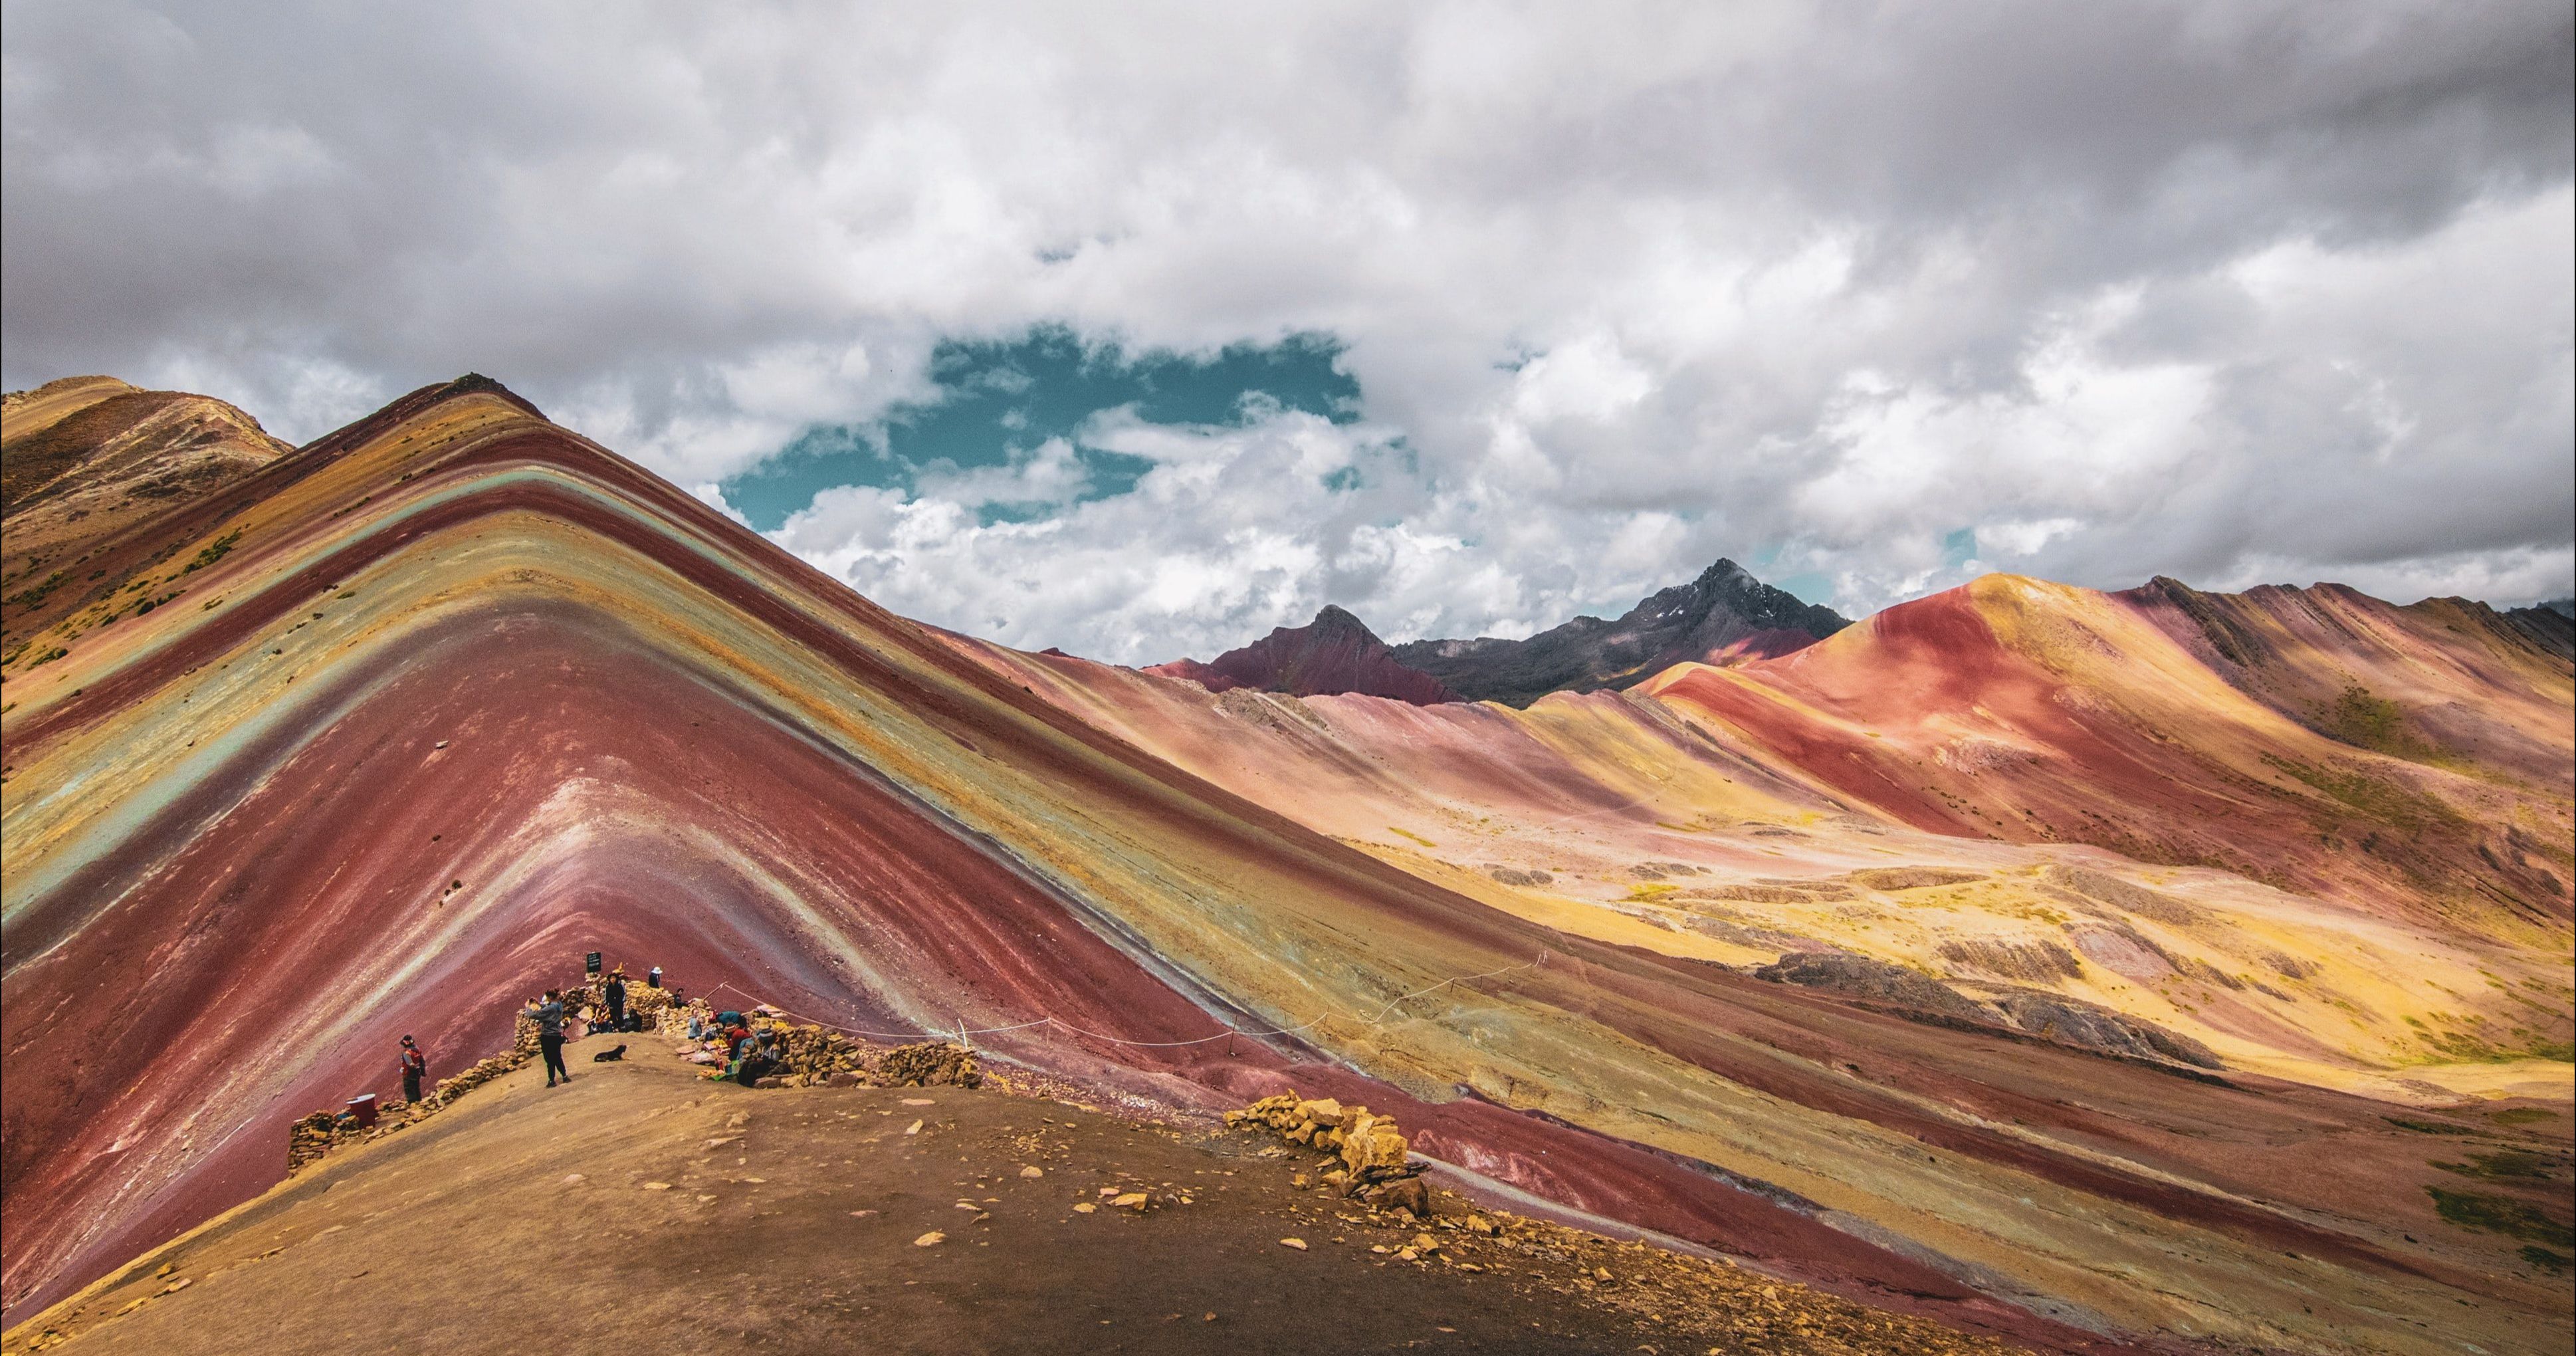 What You Should Know Before You Travel To Rainbow Mountain in Peru